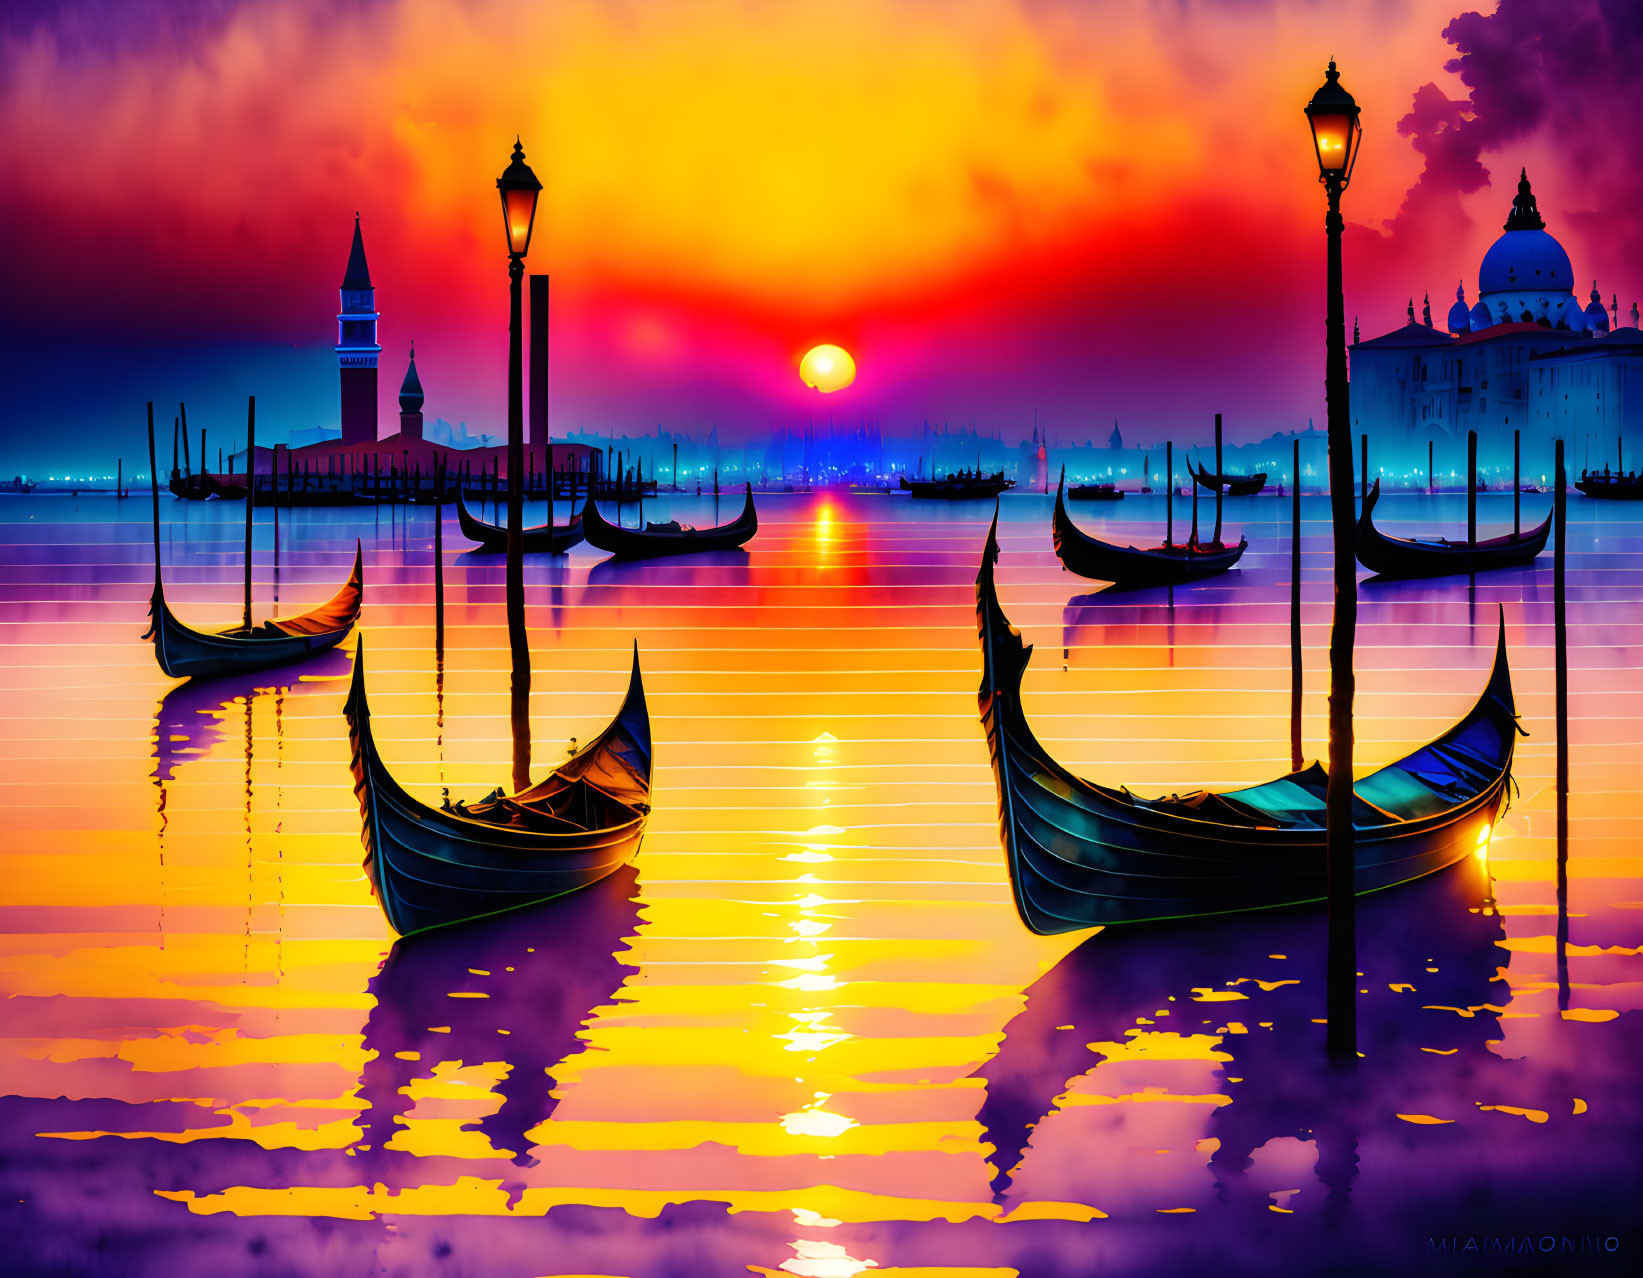 Vibrant Venice Sunset with Gondolas and Church Silhouette